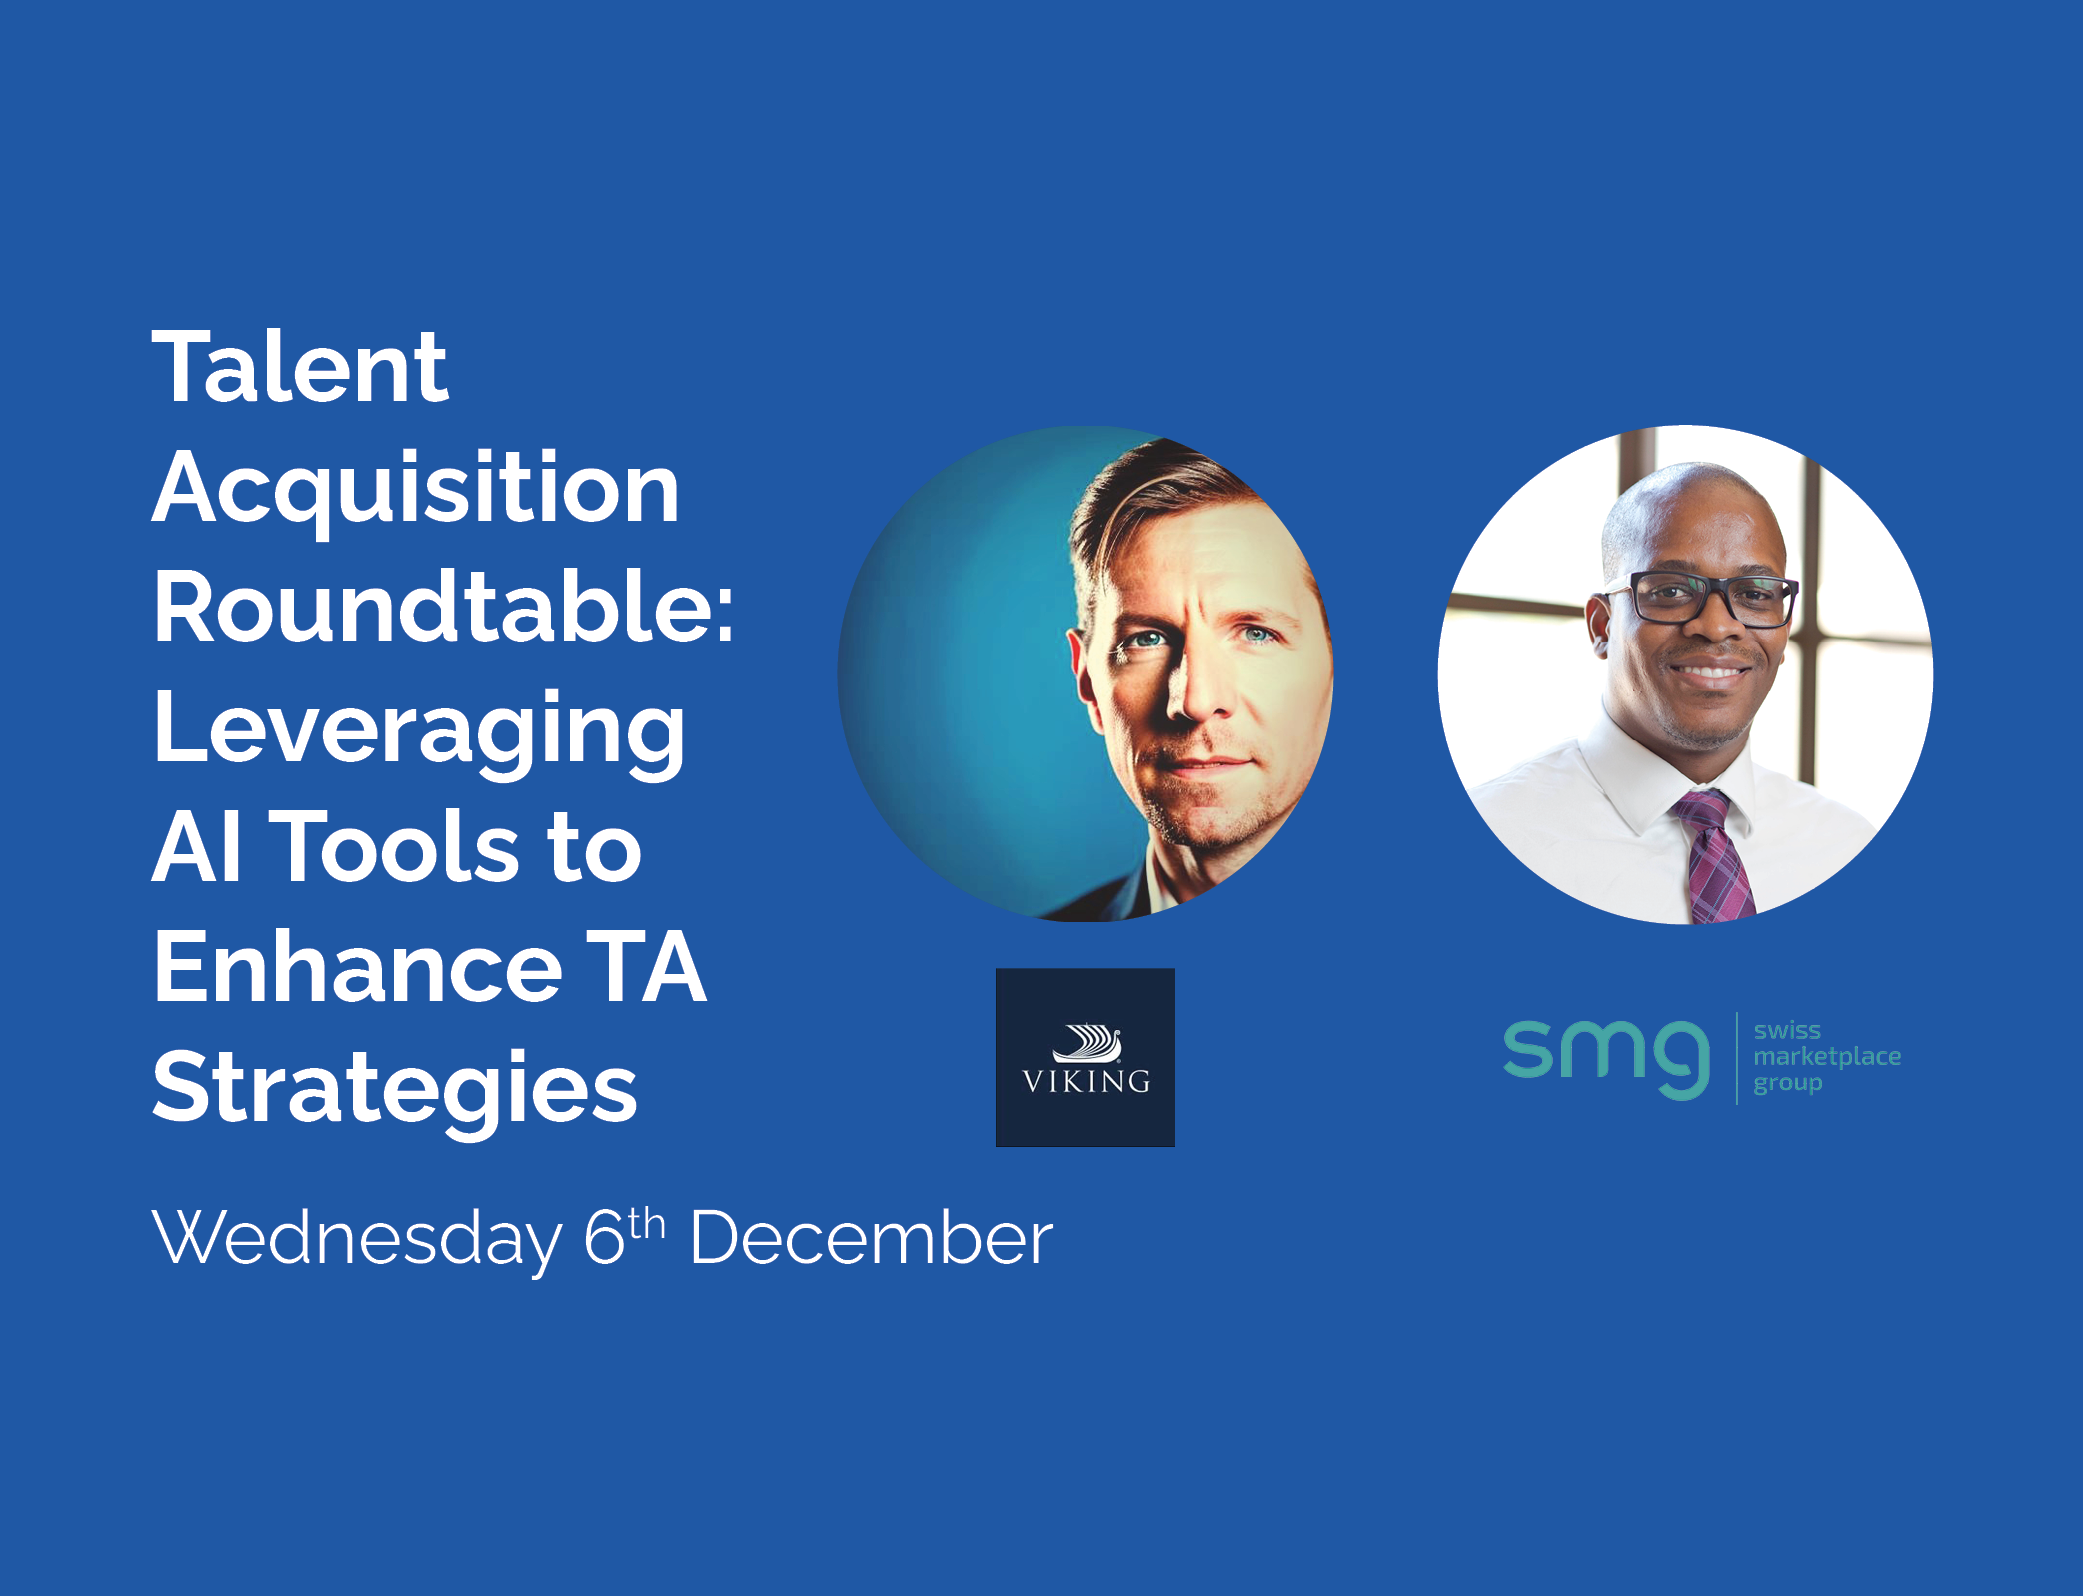 Talent Acquisition Roundtable: Leveraging AI Tools to Enhance TA Strategies